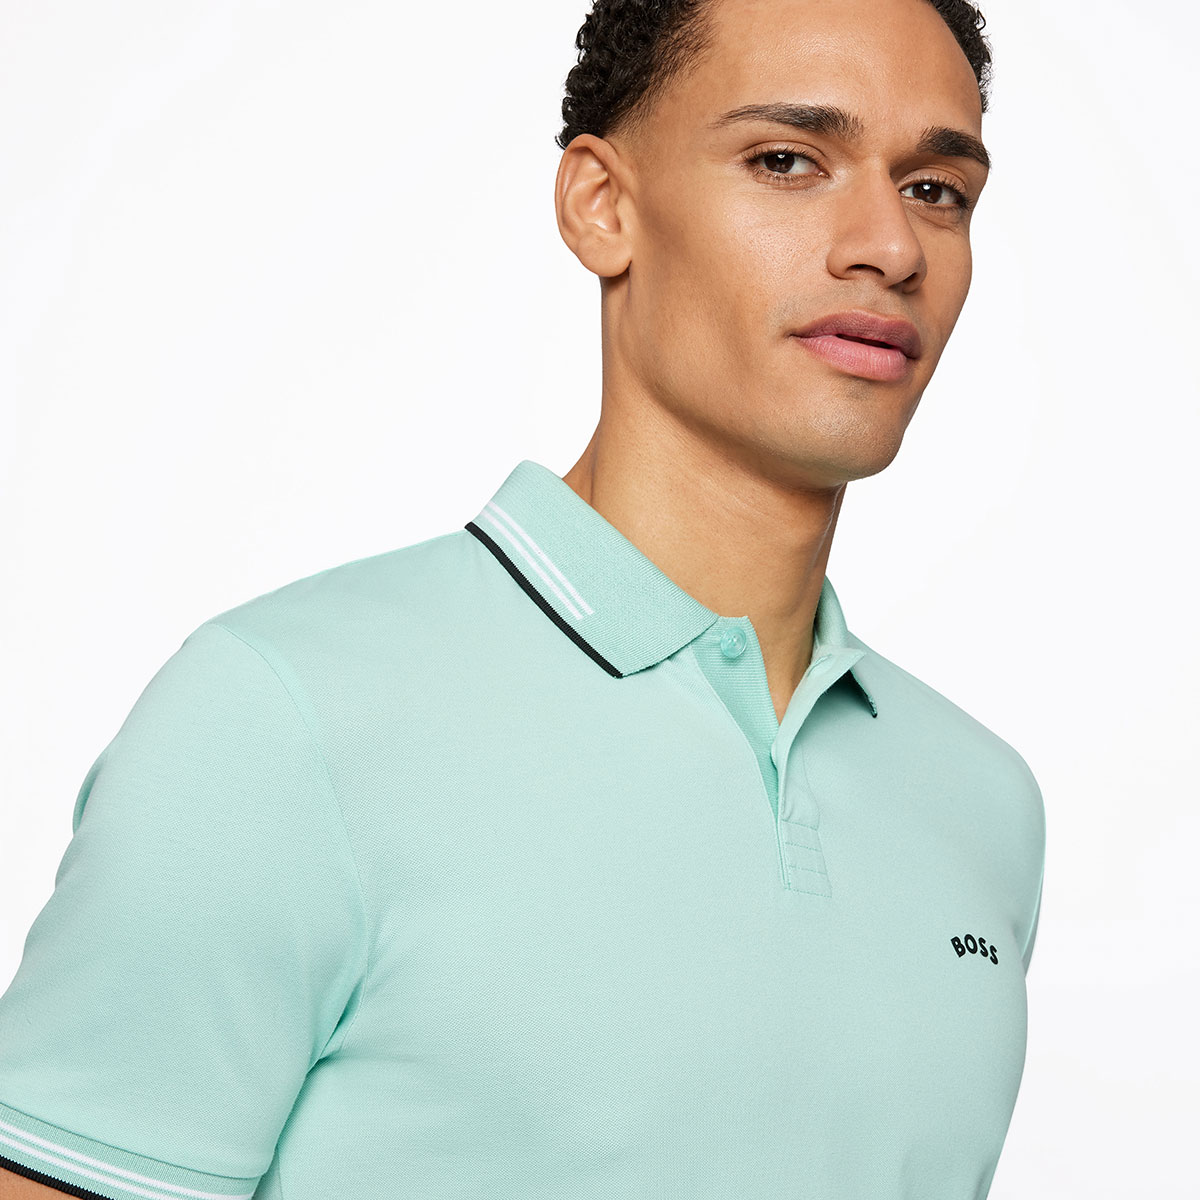 Hugo Boss Men's Paul Curved Polo Shirt from american golf